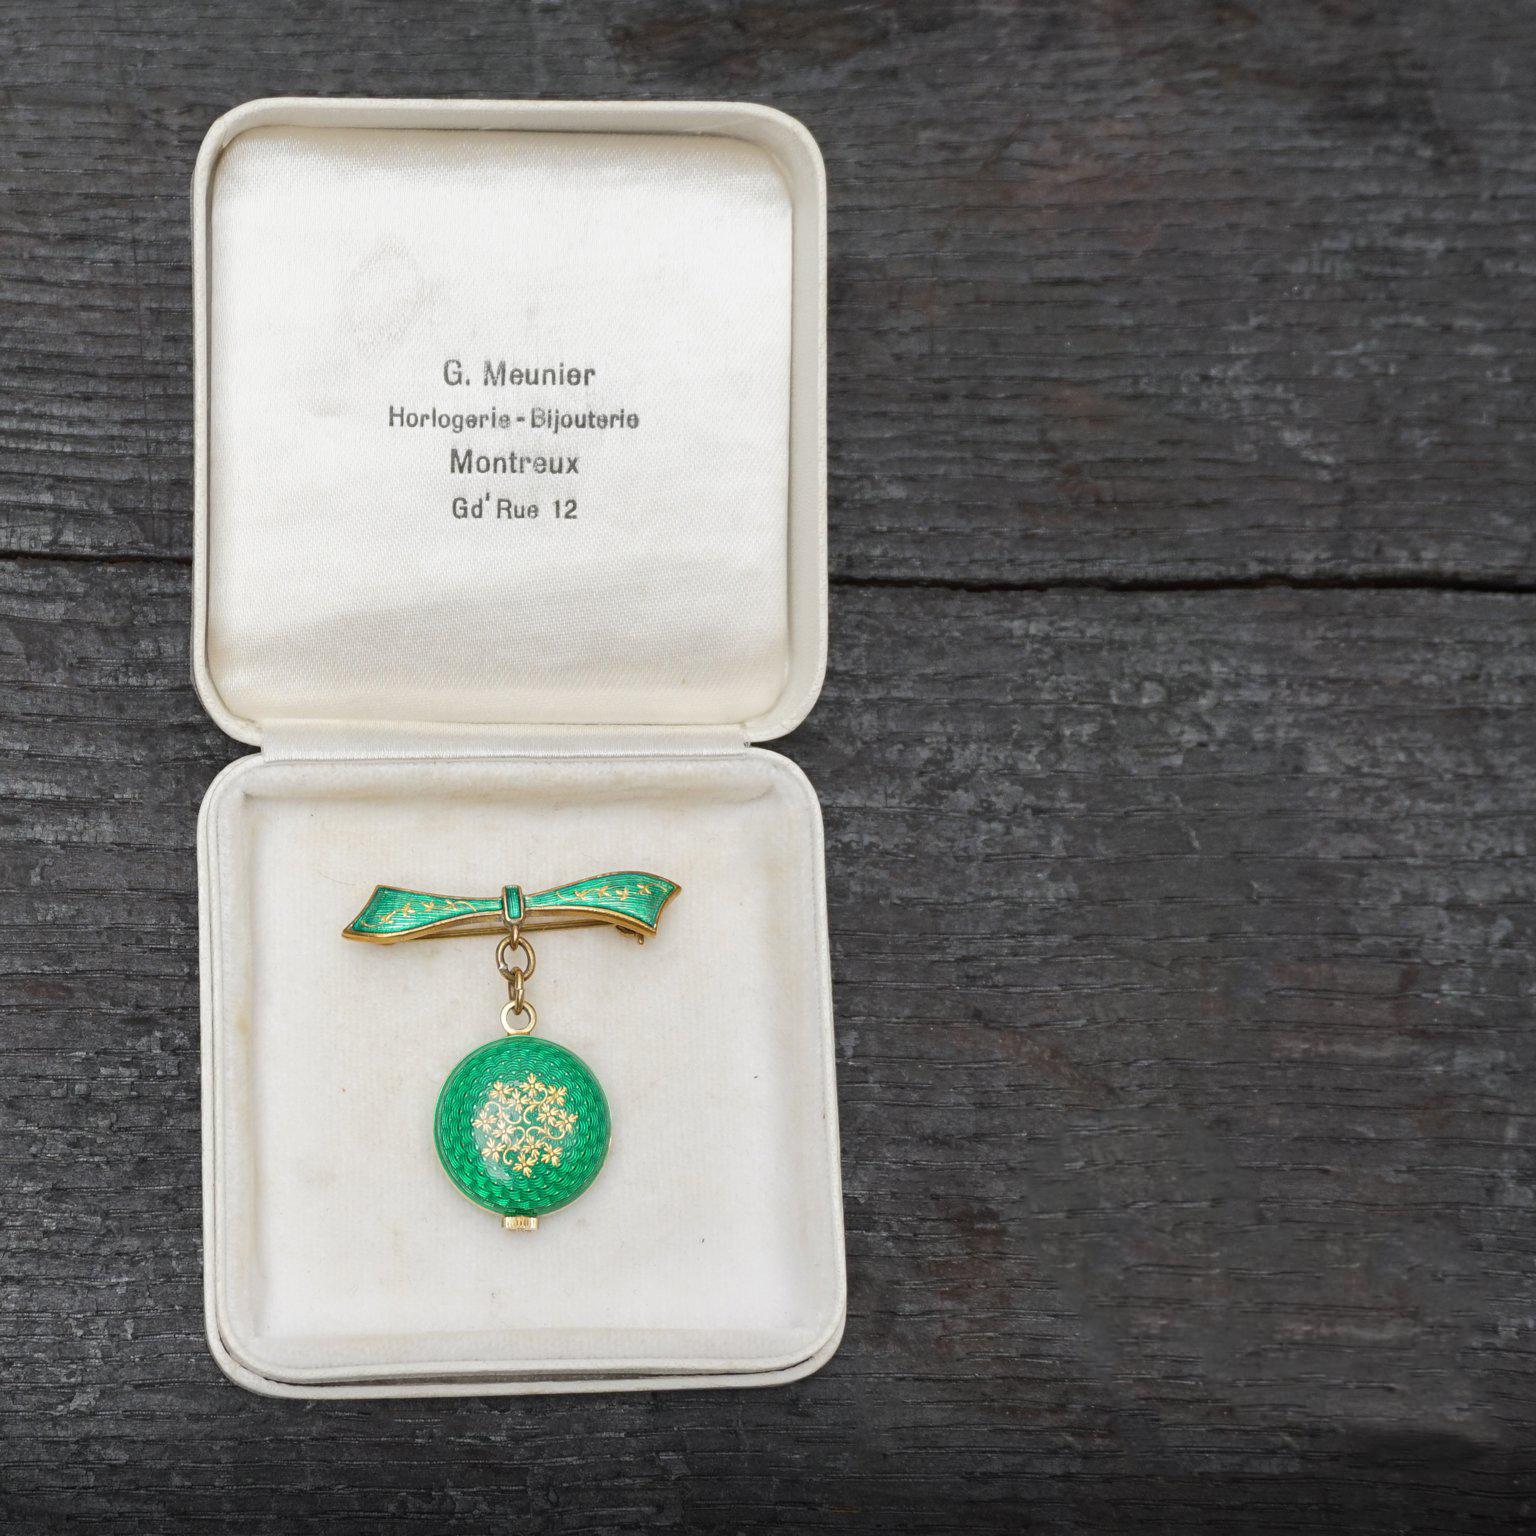 Early 20th century Swiss watch brooch by Nadine with green guilloche enamel on gilt silver, oh just look at this lovely little piece of fine practical jewelry, not bigger than a walnut!

Perfect green enamel over guilloche gilt sterling silver,